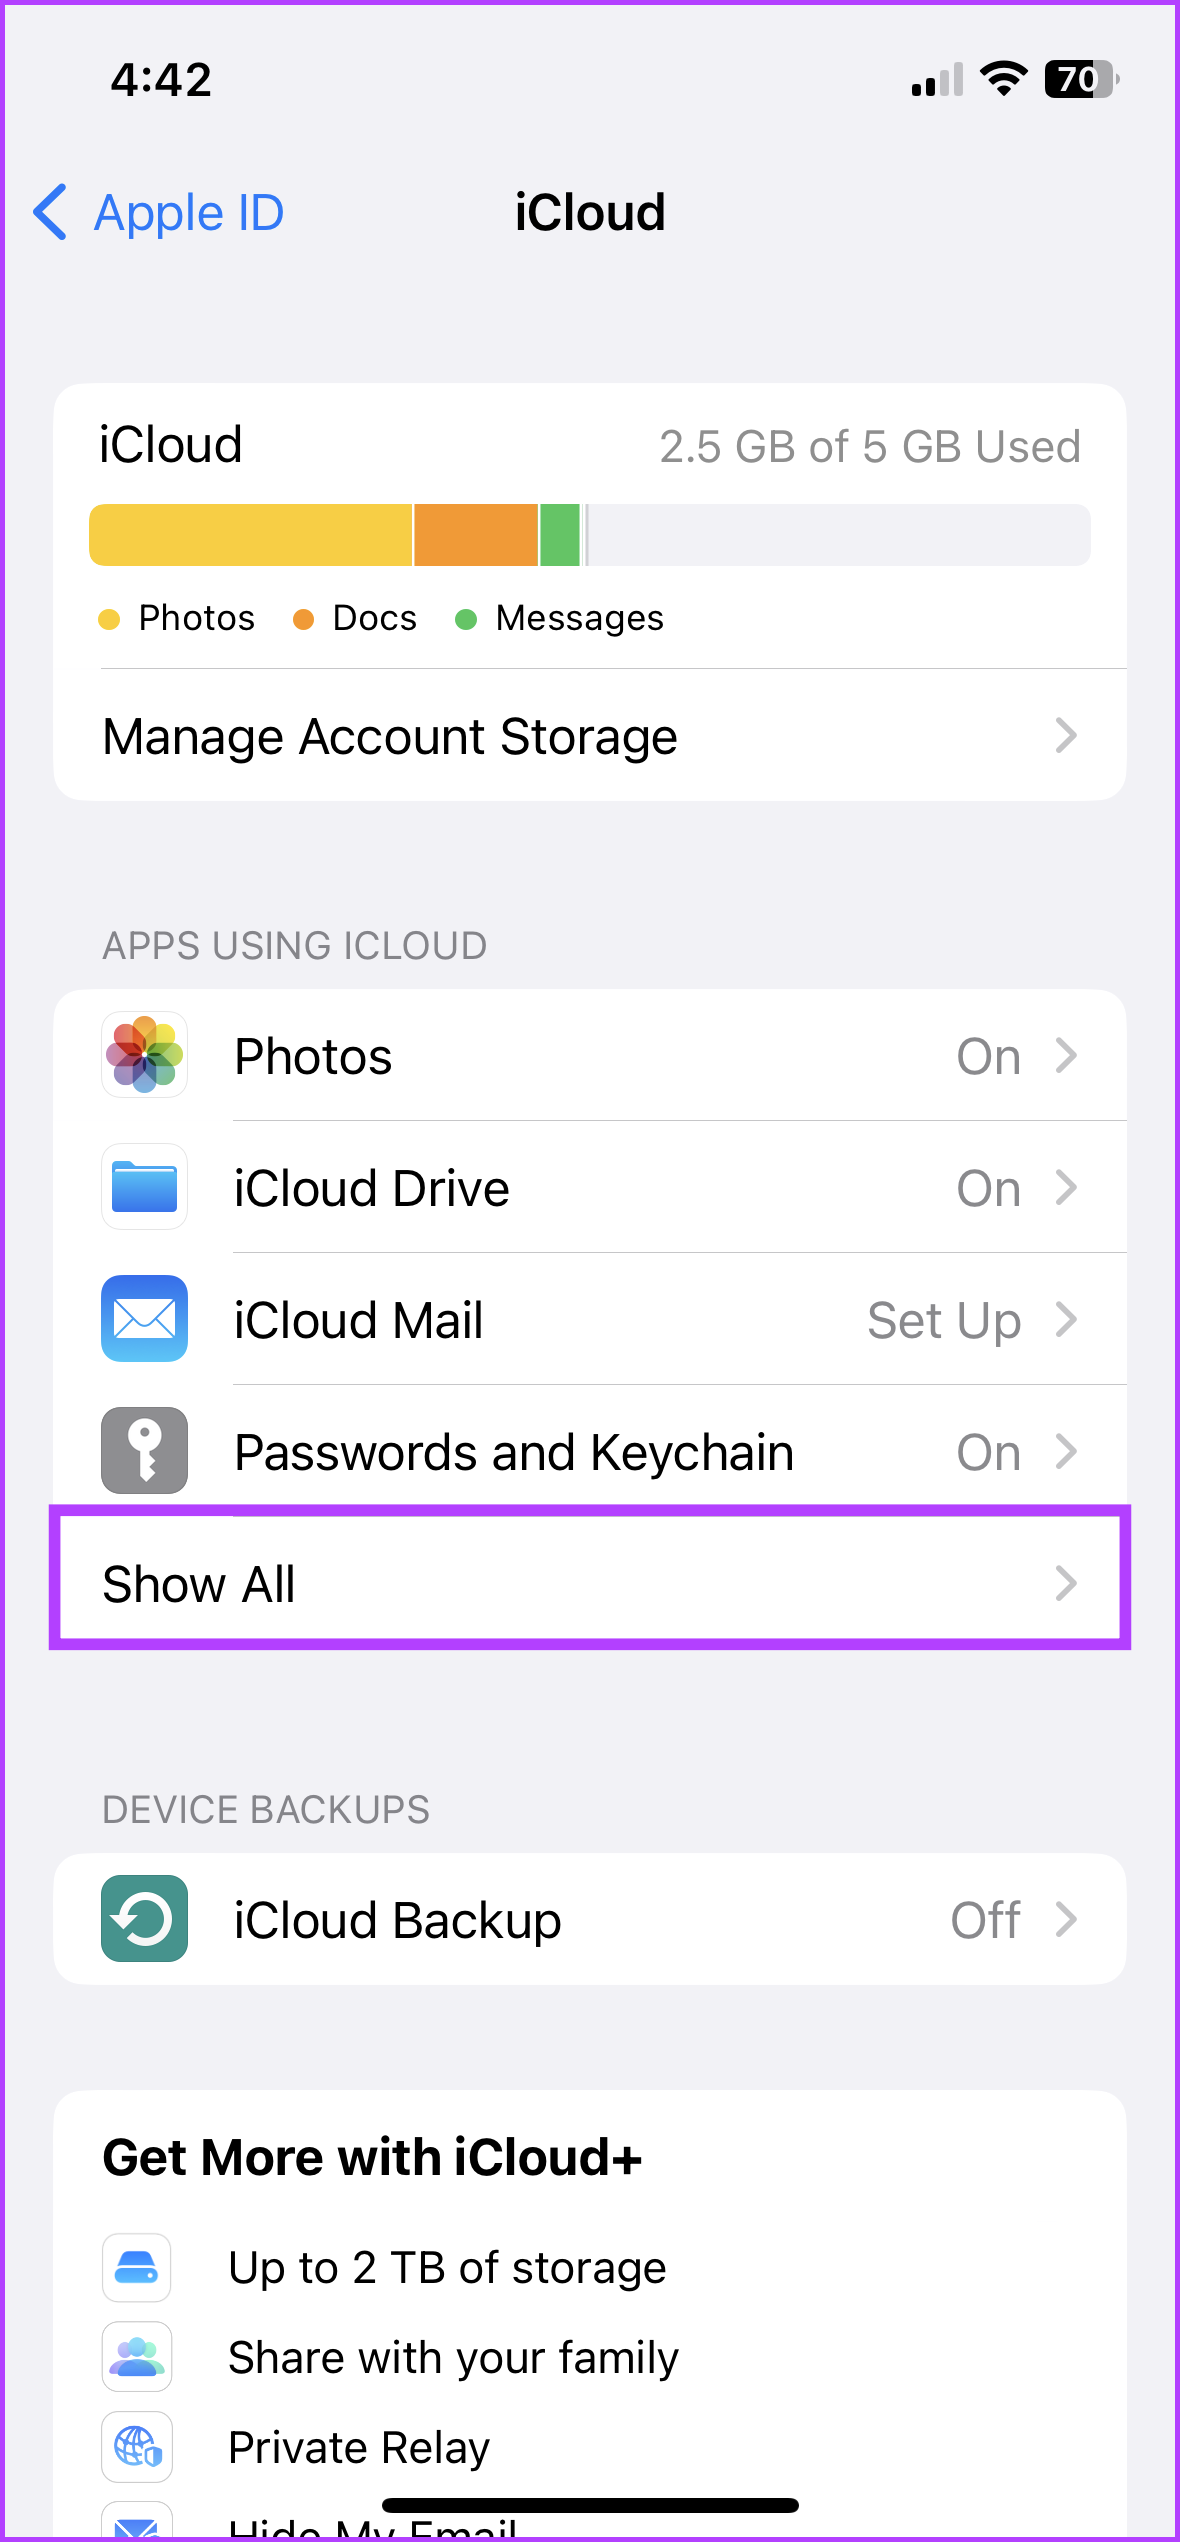 Tap Show All to view apps that use iCloud